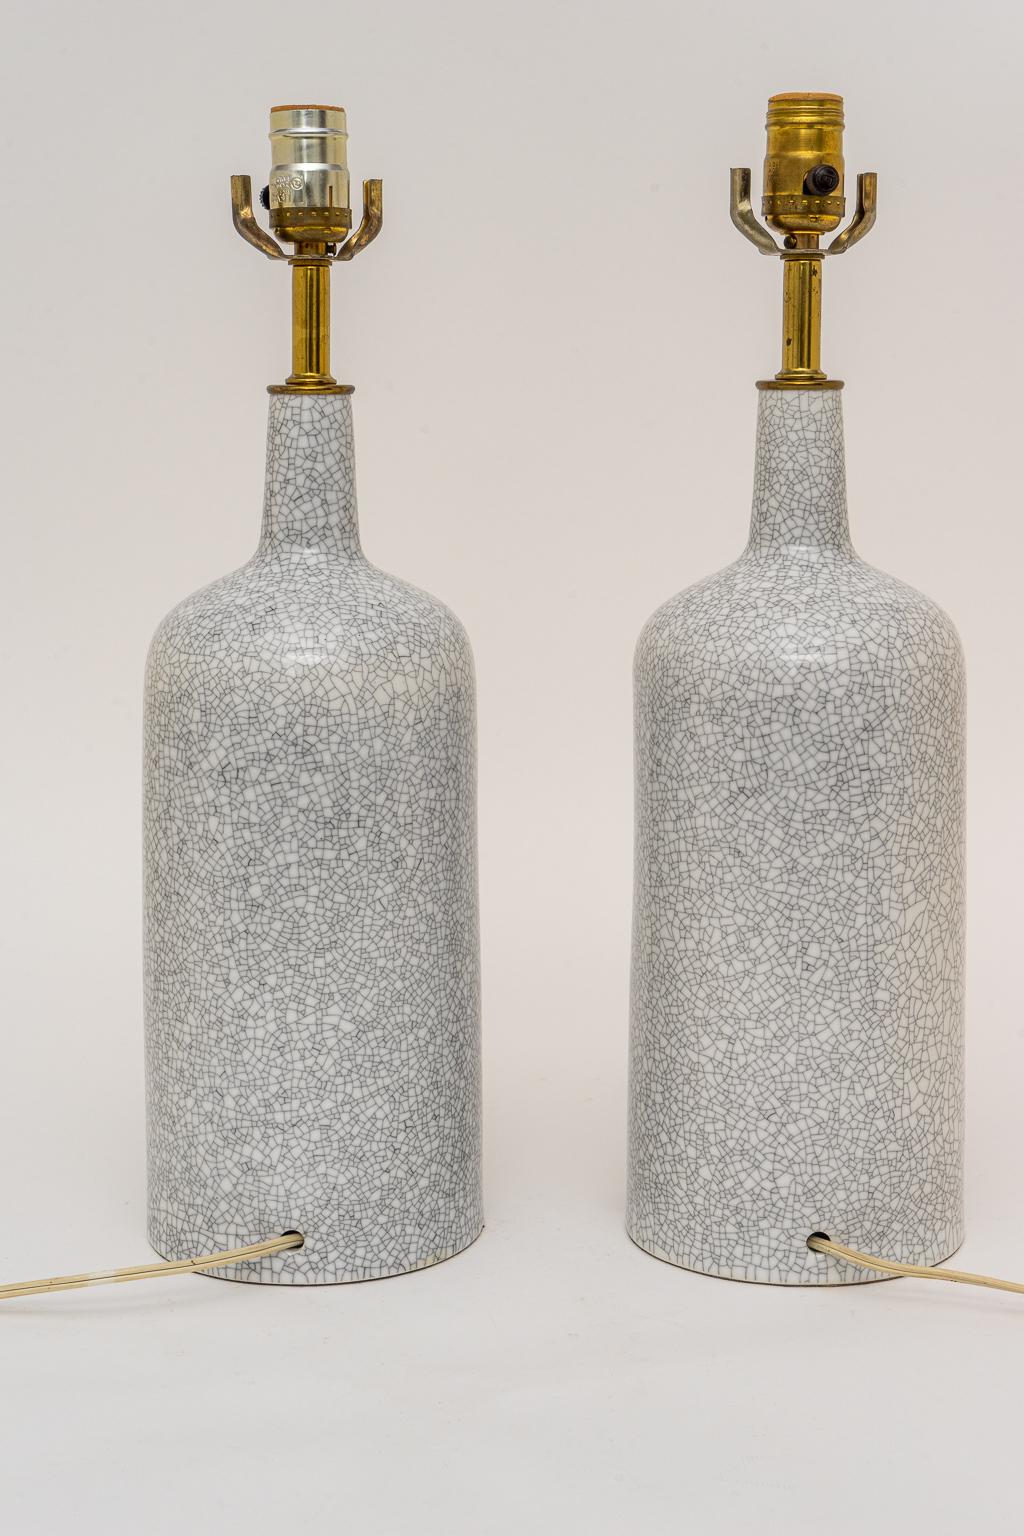 Swedish Pair of Crackle Glaze Lamps by Arabia